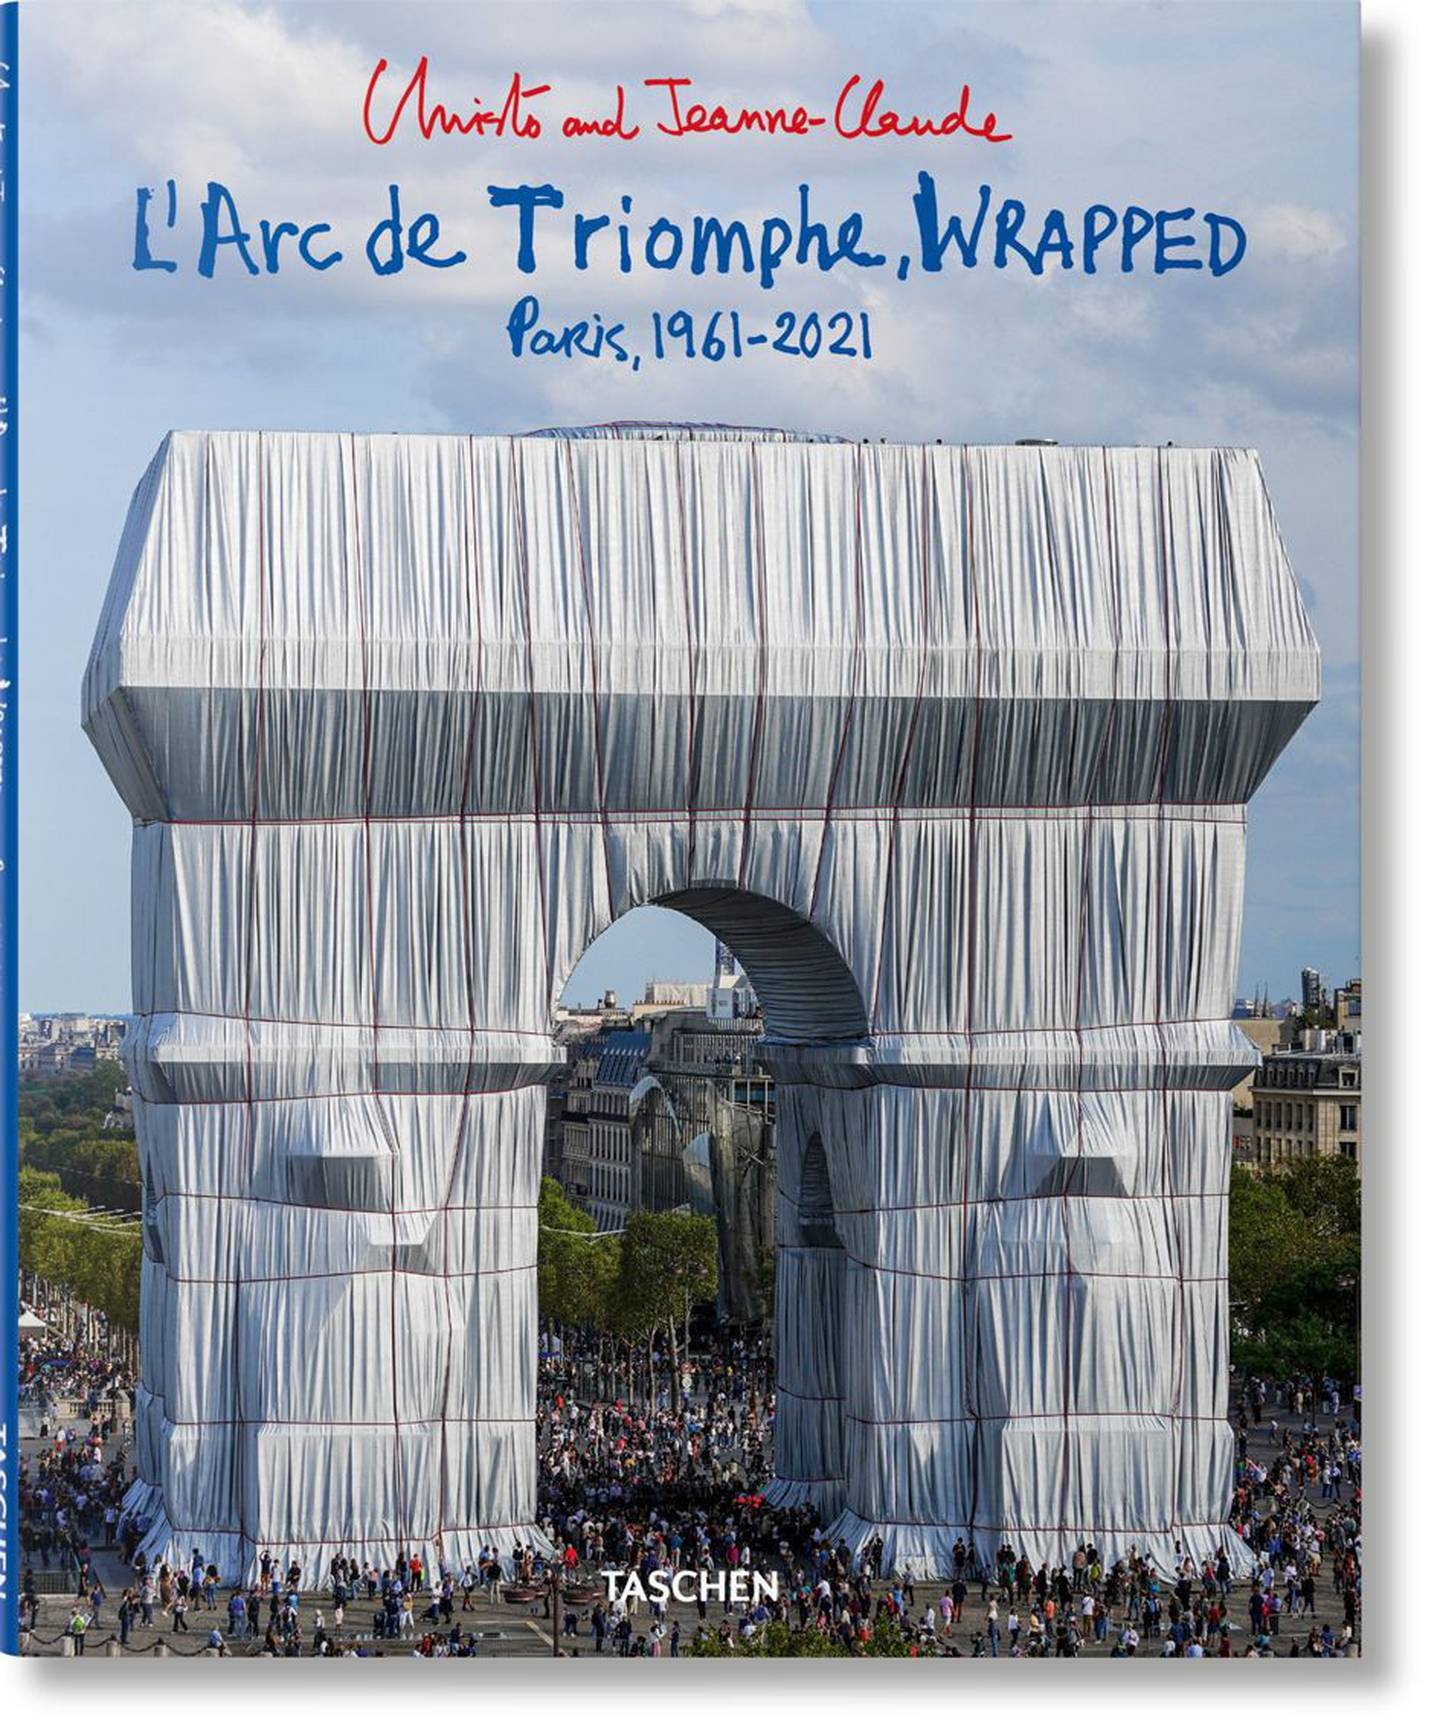 The cover of the Taschen book 'Christo and Jeanne-Claude, L’Arc de Triomphe, Wrapped, Paris, 1961-2021'. Photo: Taschen